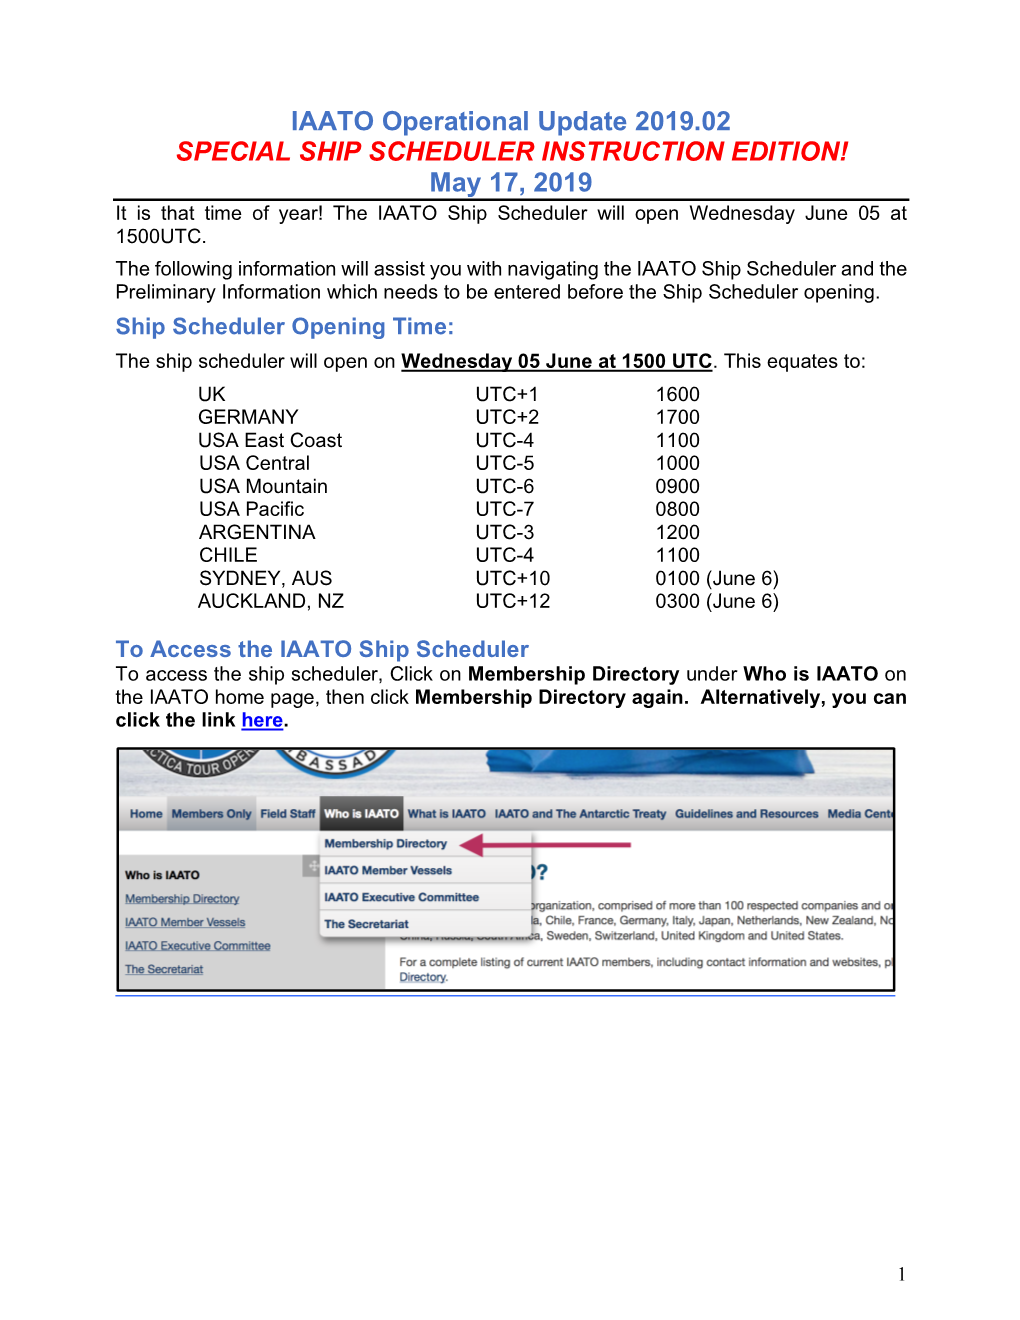 IAATO Operational Update 2019.02 SPECIAL SHIP SCHEDULER INSTRUCTION EDITION! May 17, 2019